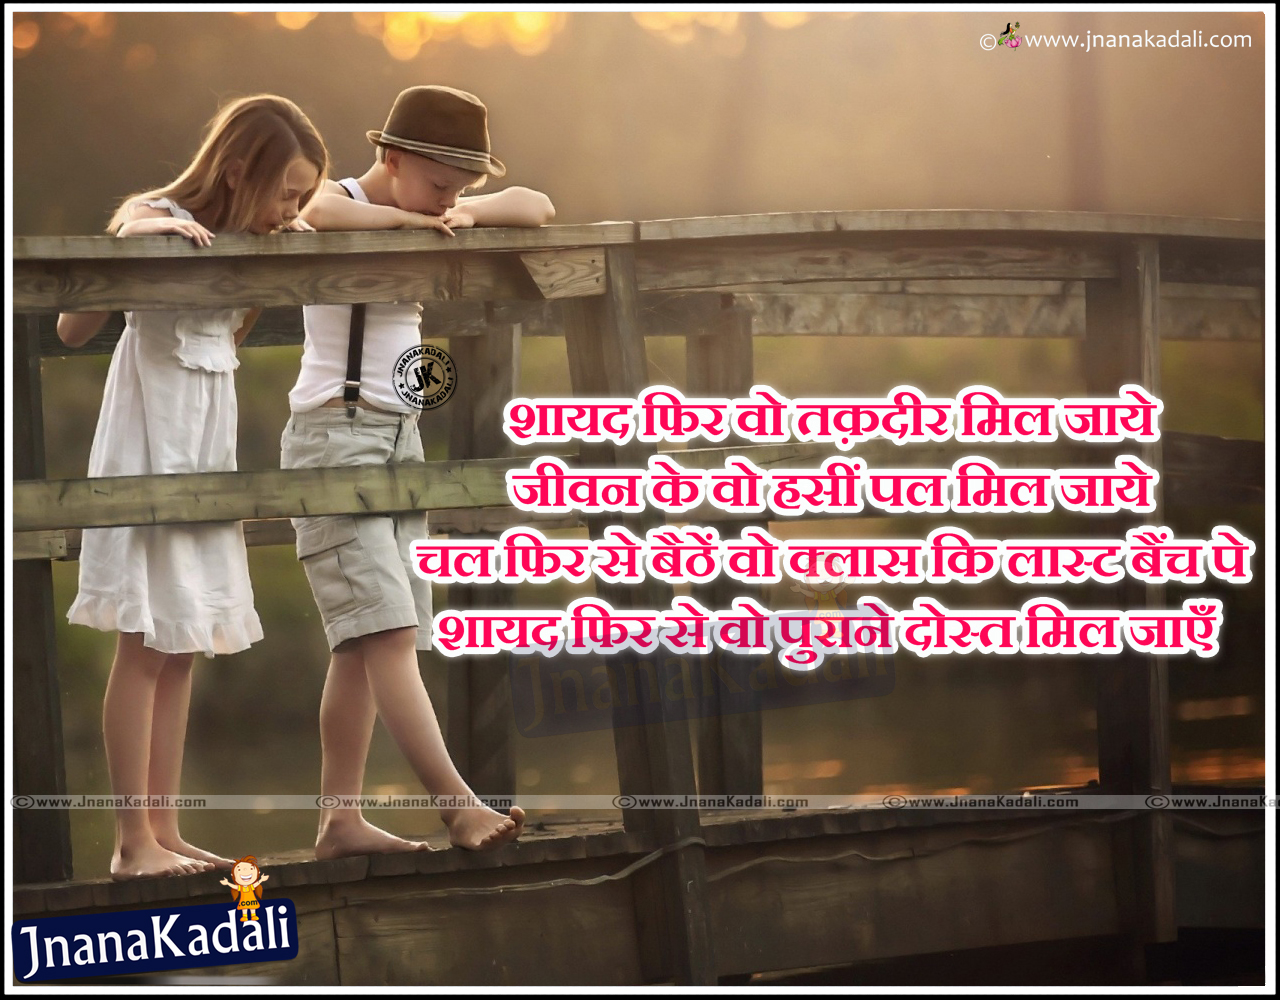 Best Hindi Friendship quotes Heart touching Relationship quotes | JNANA   |Telugu Quotes|English quotes|Hindi quotes|Tamil quotes |Dharmasandehalu|